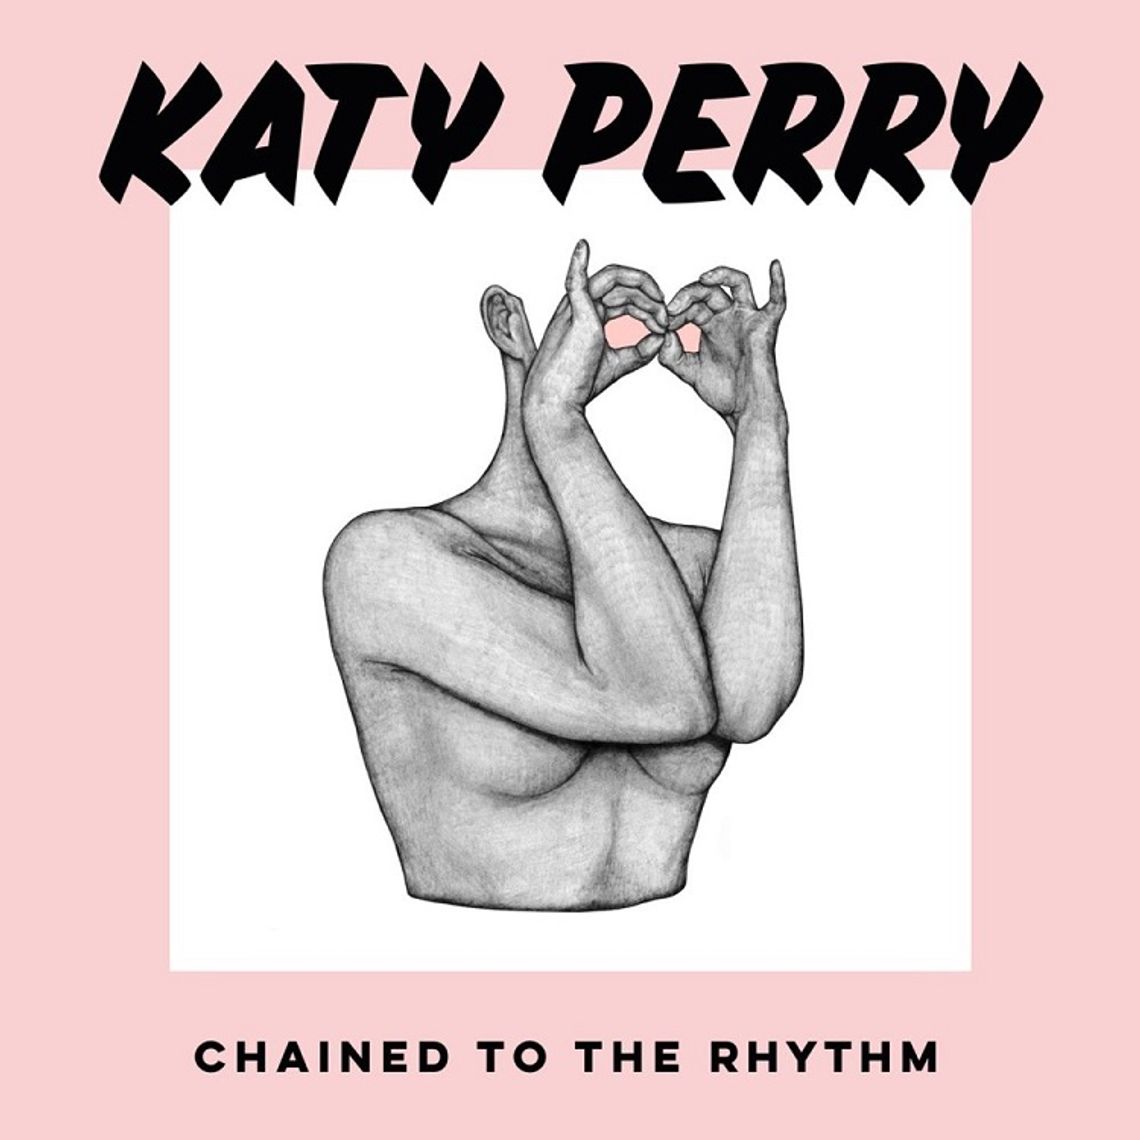 KATY PERRY - "CHAINED TO THE RHYTHM"